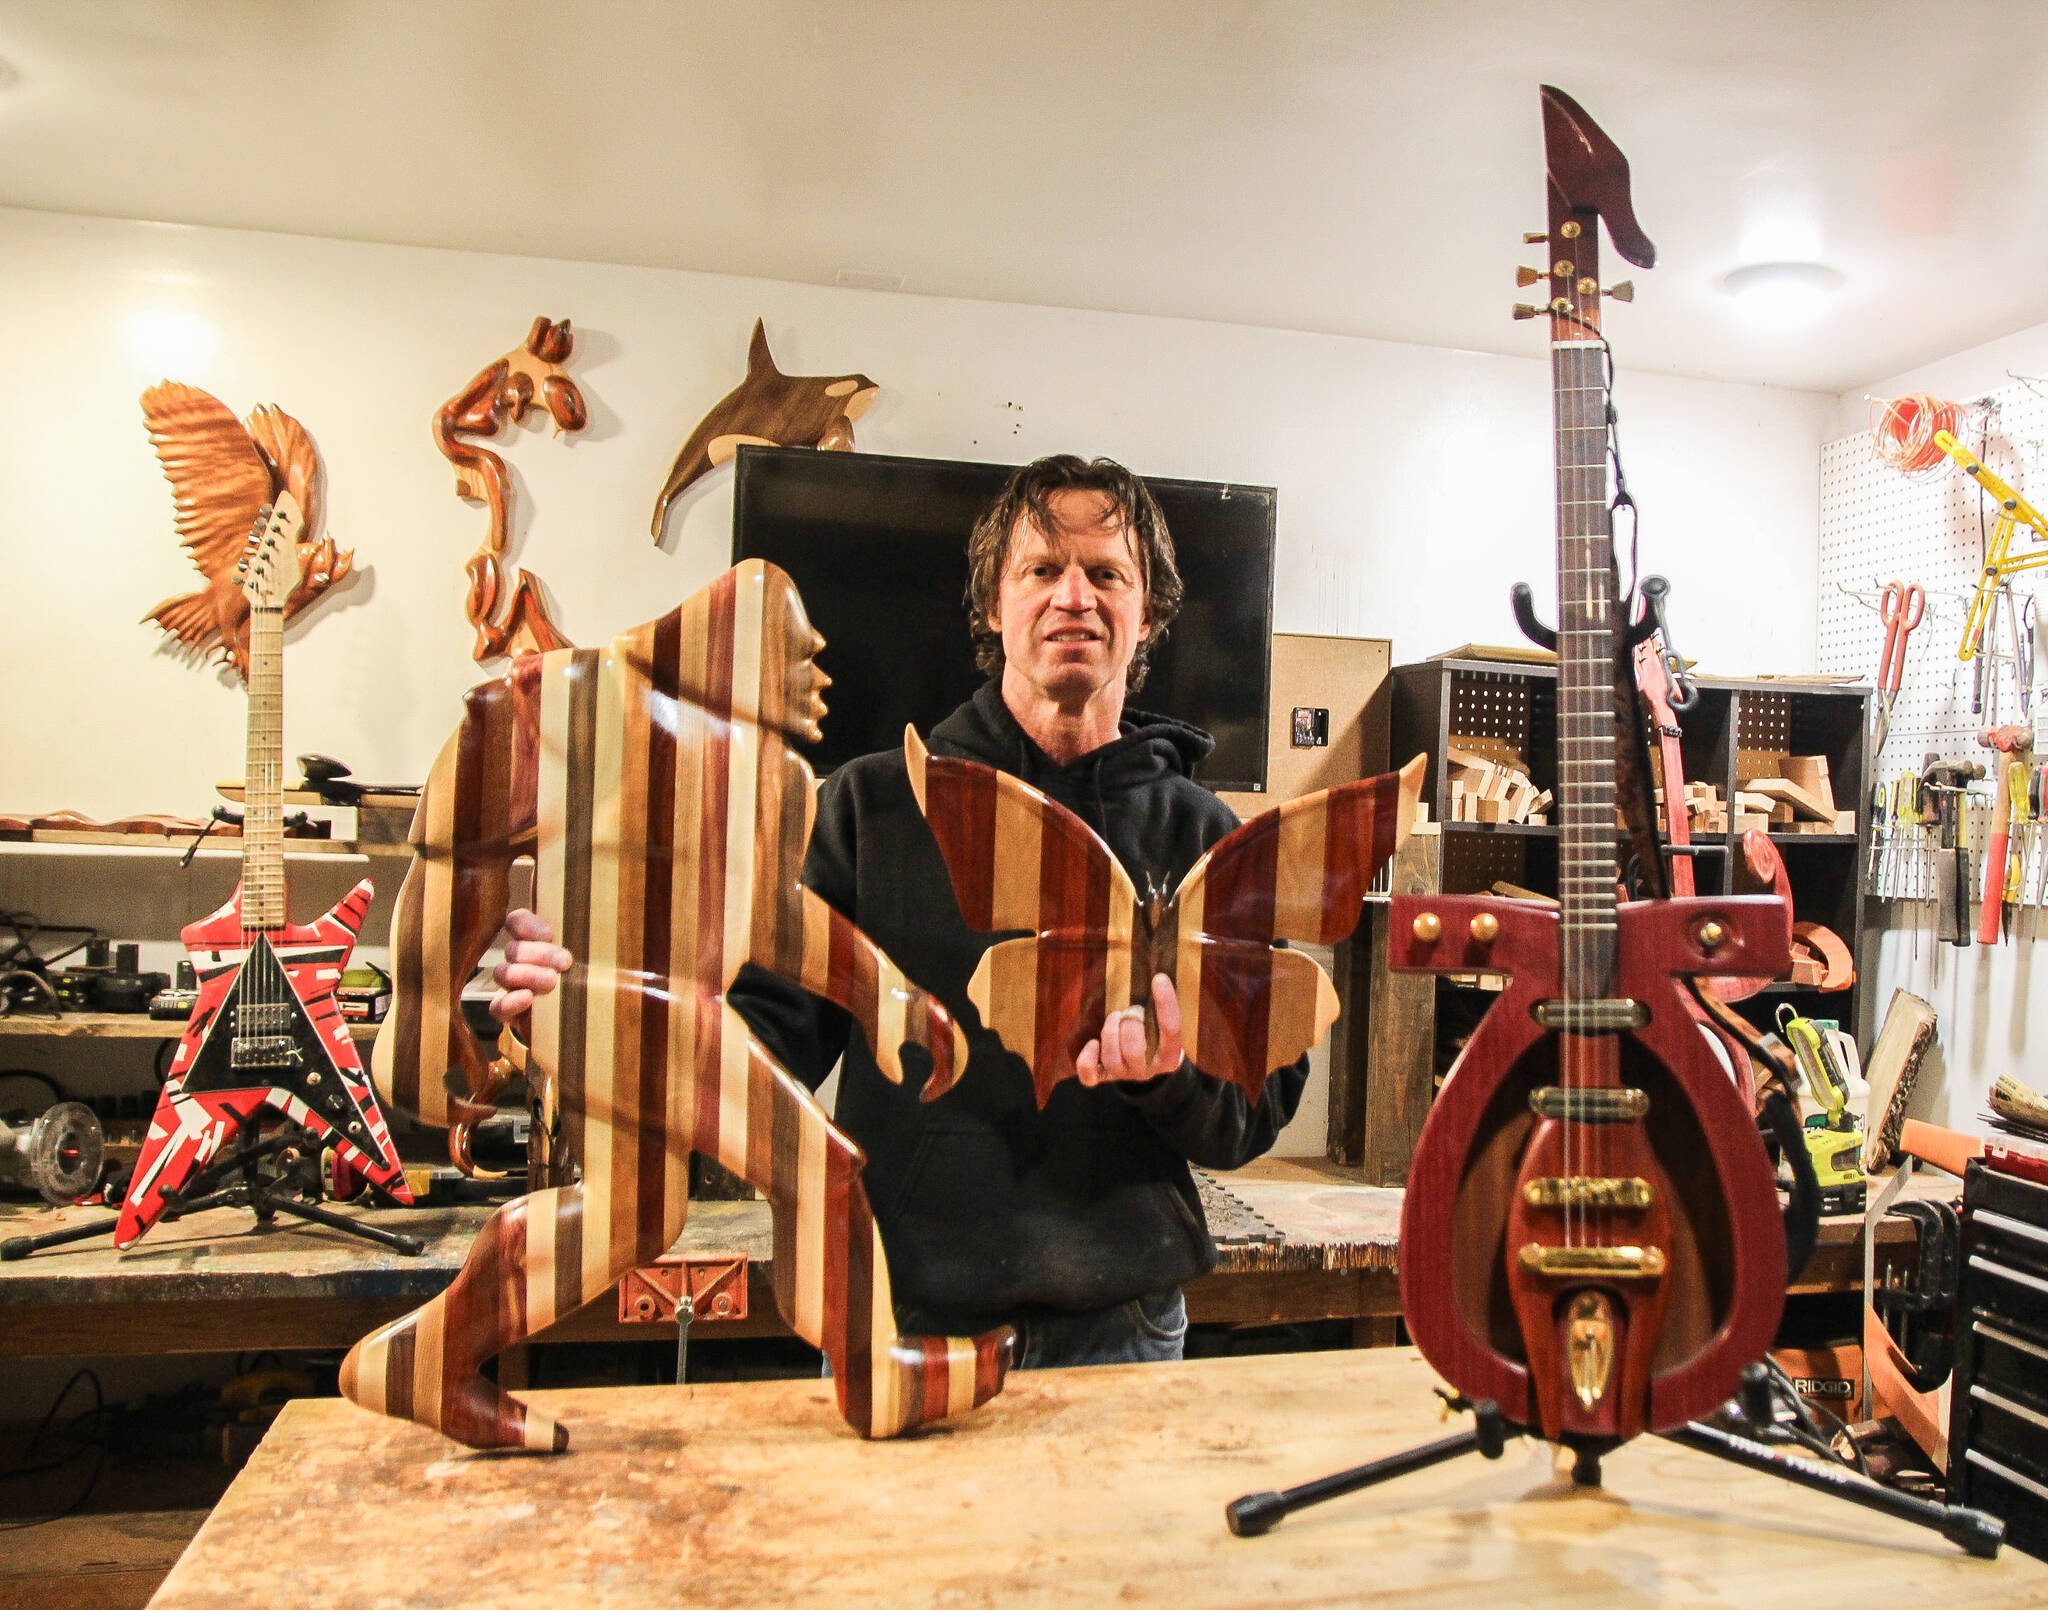 Chad Pilkington, a wood carver who lives in Oak Harbor, poses in his garage with some of his creations: Bigfoot, a butterfly and a hieroglyph guitar. (Photo by Luisa Loi)